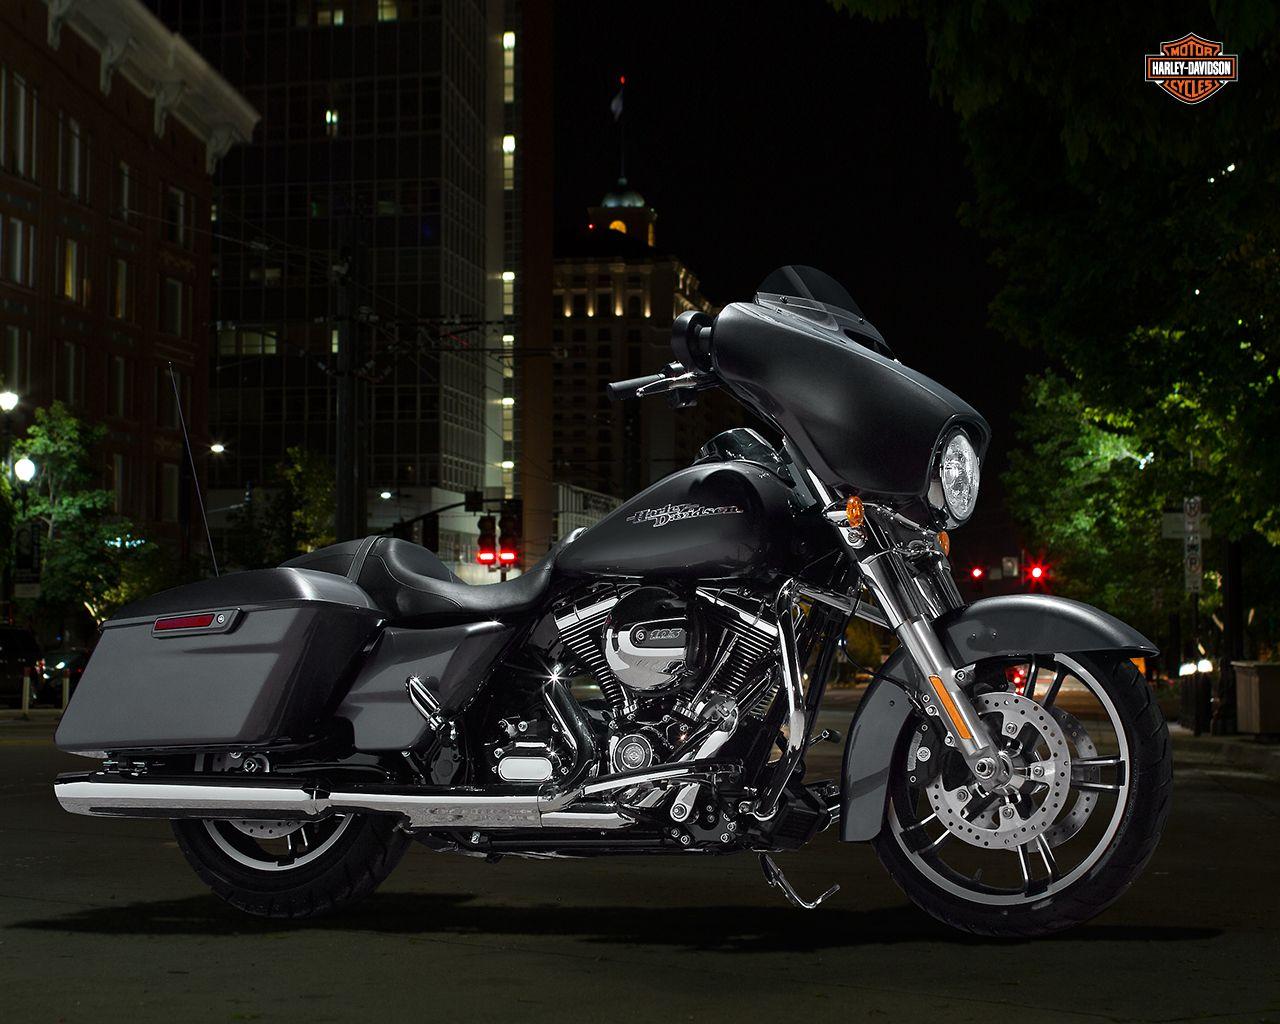 Harley Davidson Street Glide. The Sickest Touring Bike There Is